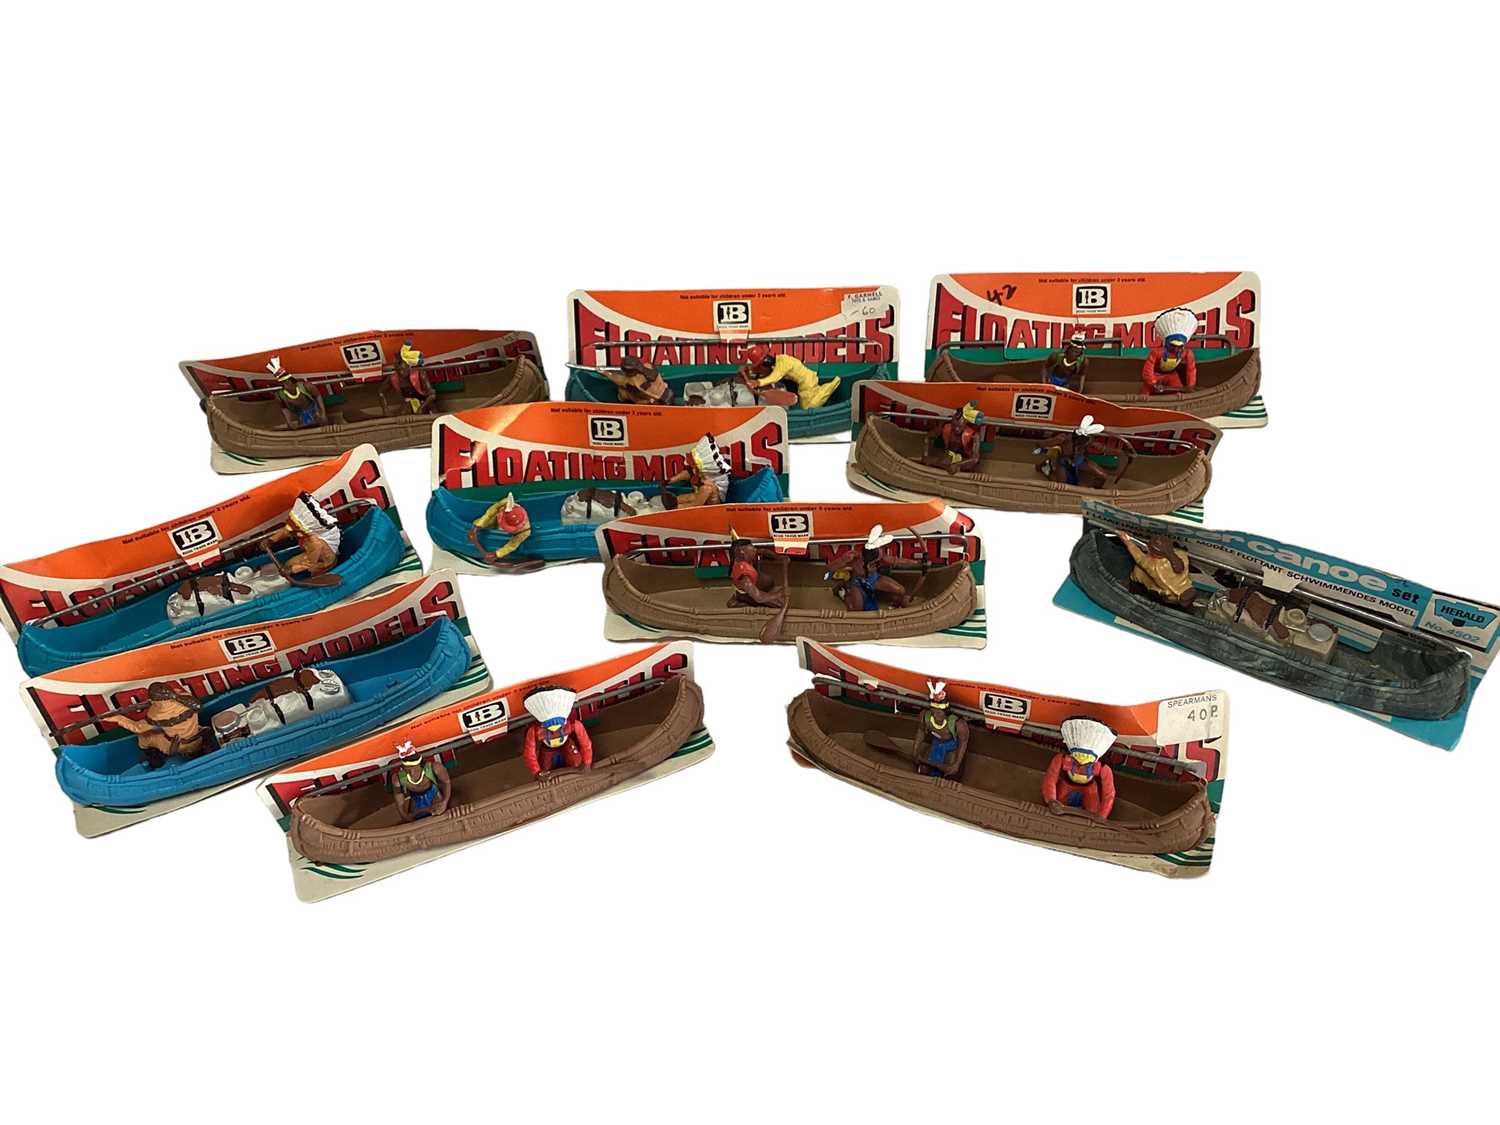 Britains floating models Canoes (some with figures missing), on card stand (11)